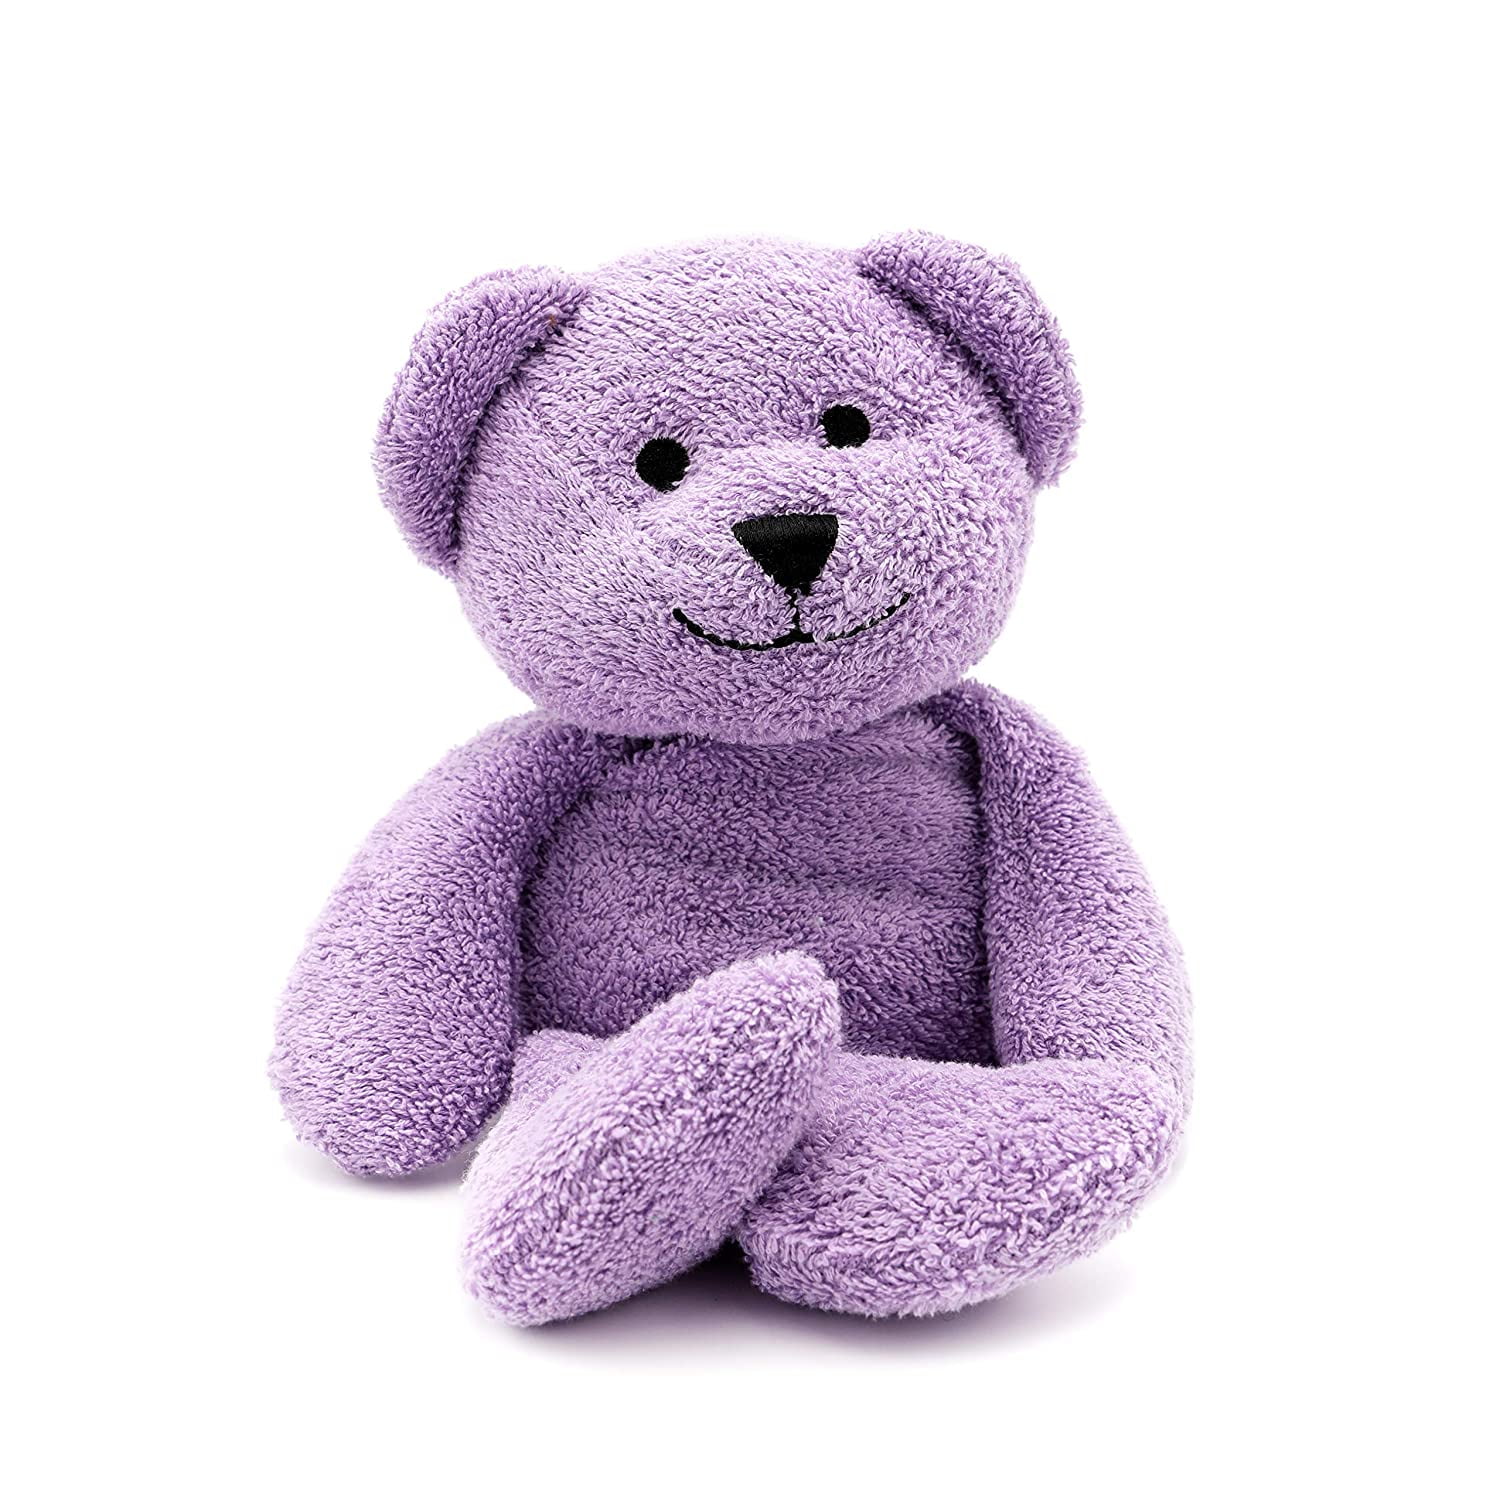 Thermal-Aid Zoo - Tumble The Lavender Bear - Kids Hot and Cold Pain Relief  Heating Pad Microwavable Stuffed Animal & Cooling Pad - Easy Wash, Natural  Sleep Aid - Pregnancy Must-Haves for